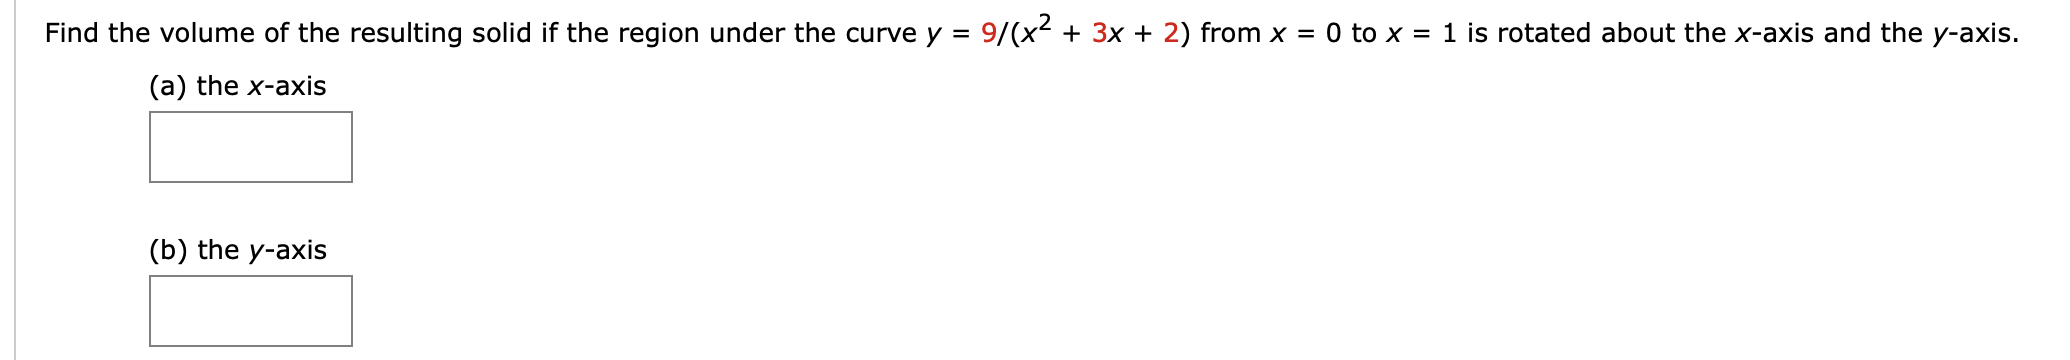 Find the volume of the resulting solid if the region under the curve y
9/(x2 + 3x + 2) from
= 0 to x = 1 is rotated about the x-axis and the y-axis.
%3D
(a) the x-axis
(b) the y-axis
